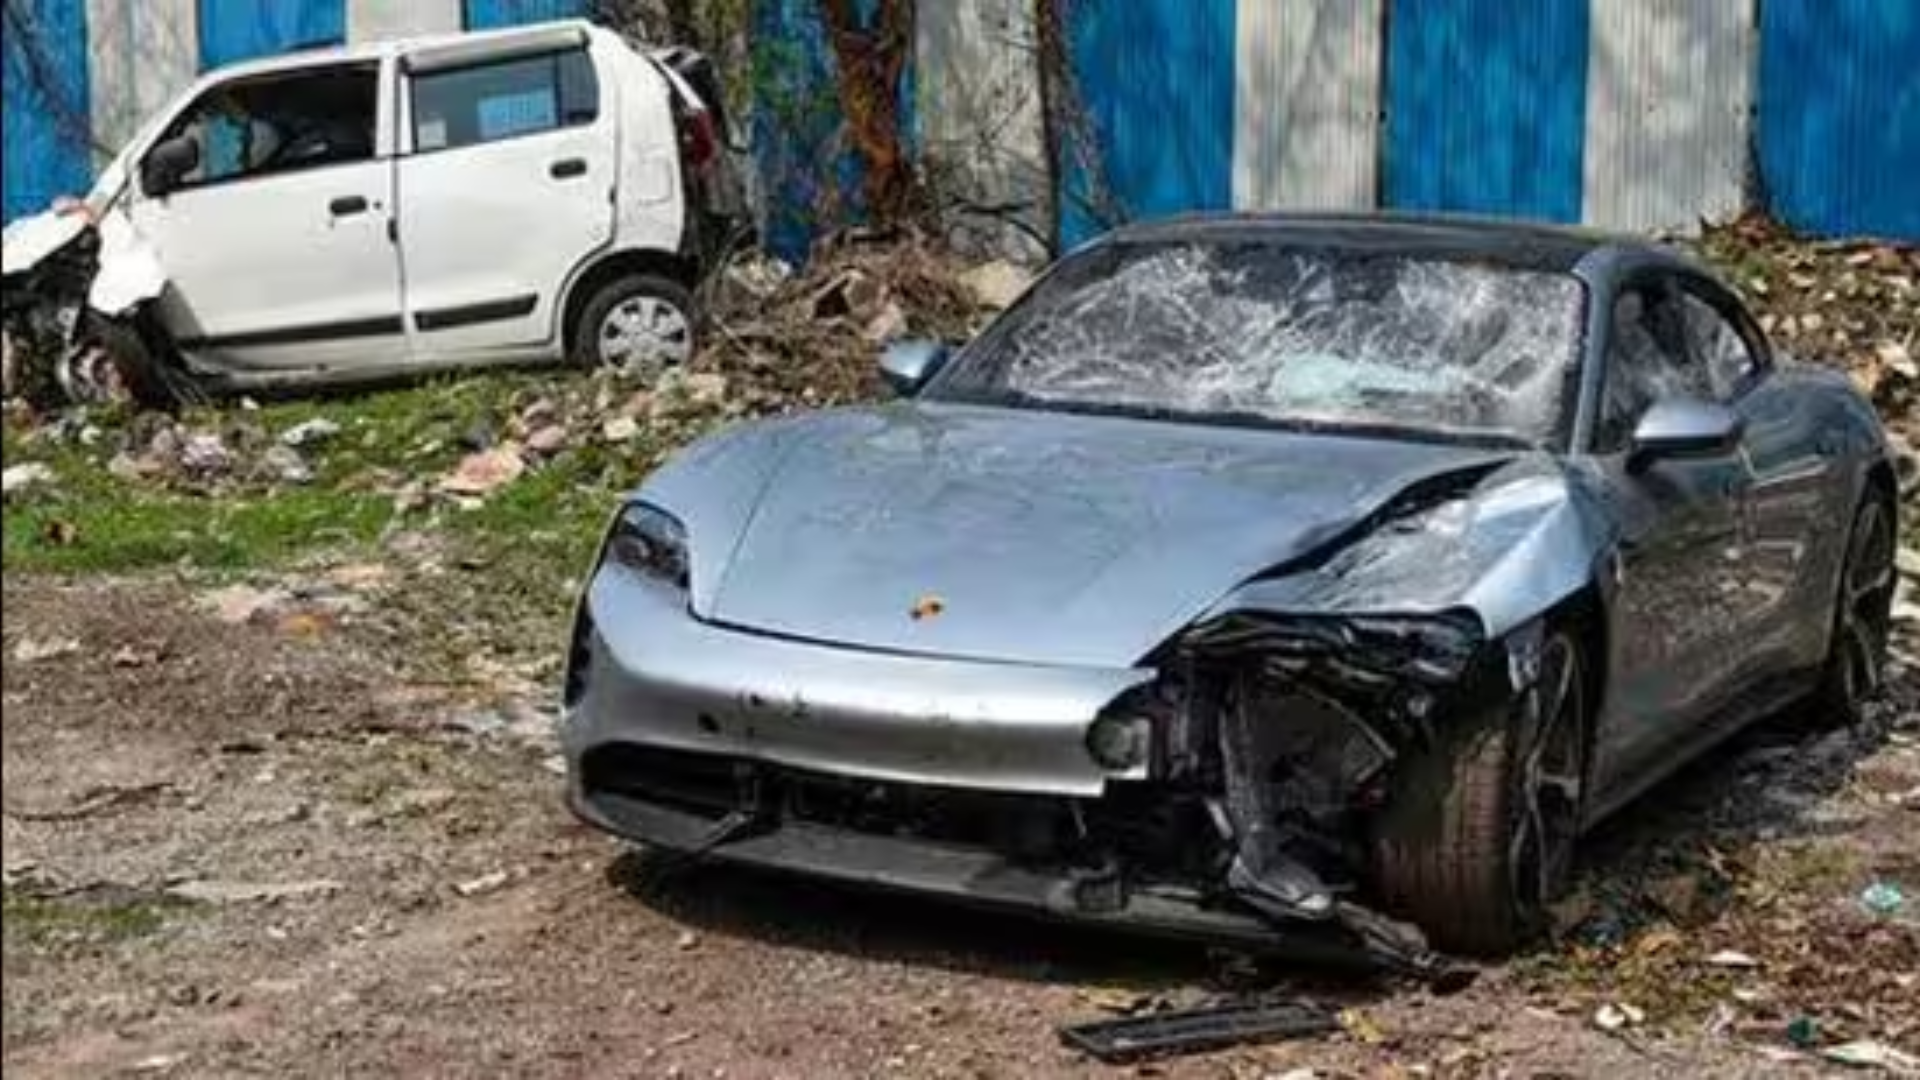 Pune Porsche Crash: Five booked For Abetment Of Suicide Including Father & Grandfather